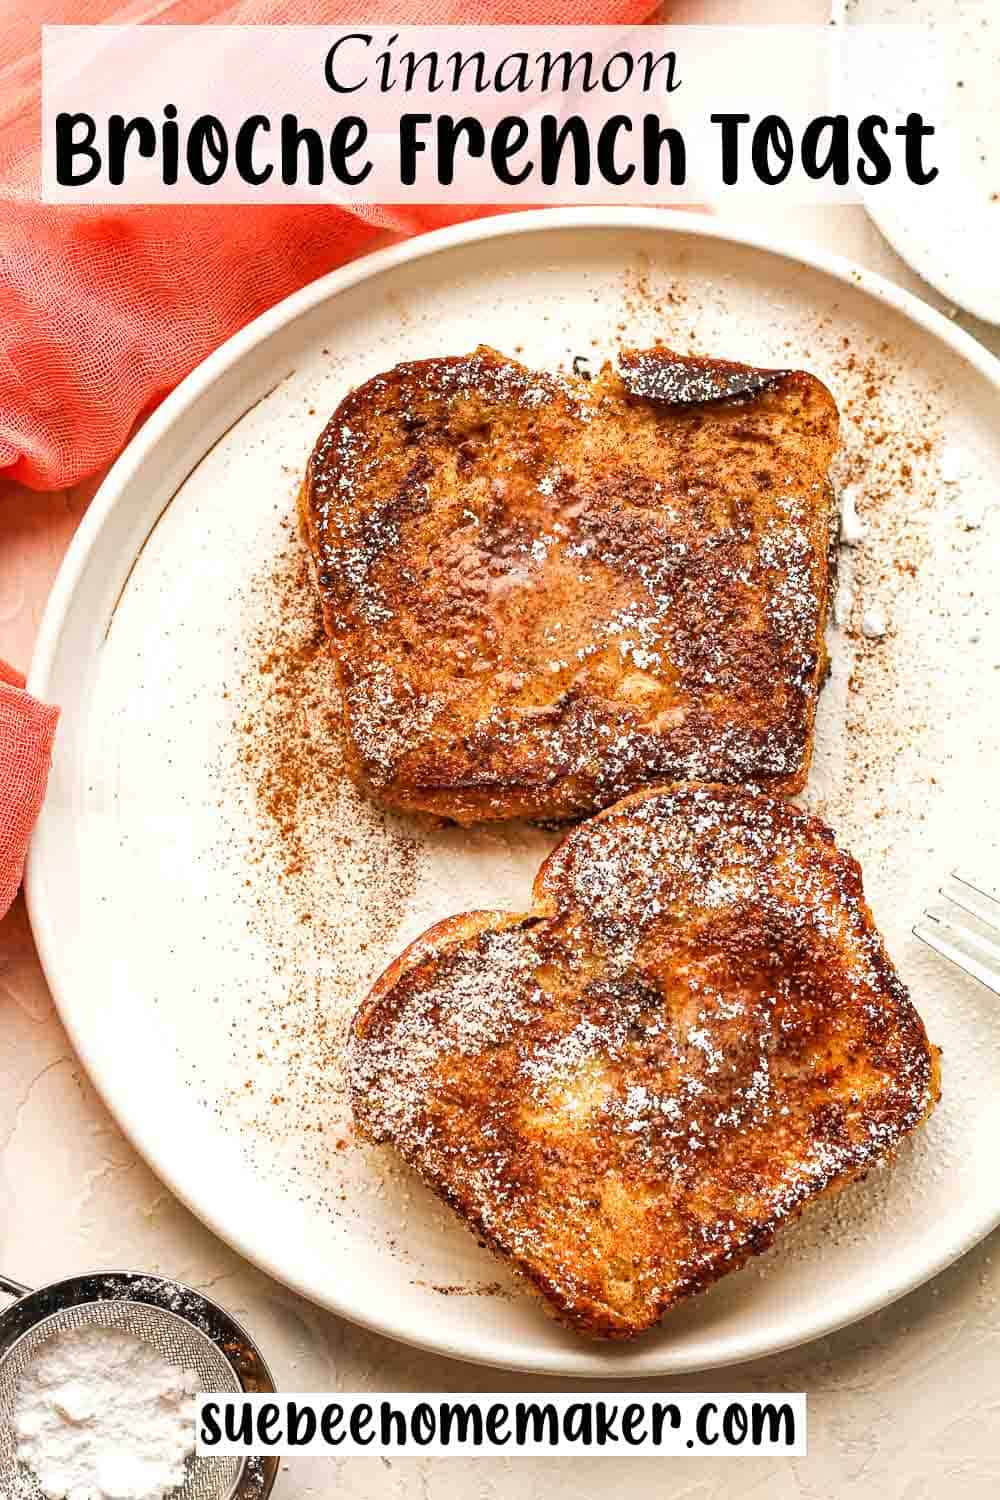 A plate of two pieces of cinnamon brioche French toast.